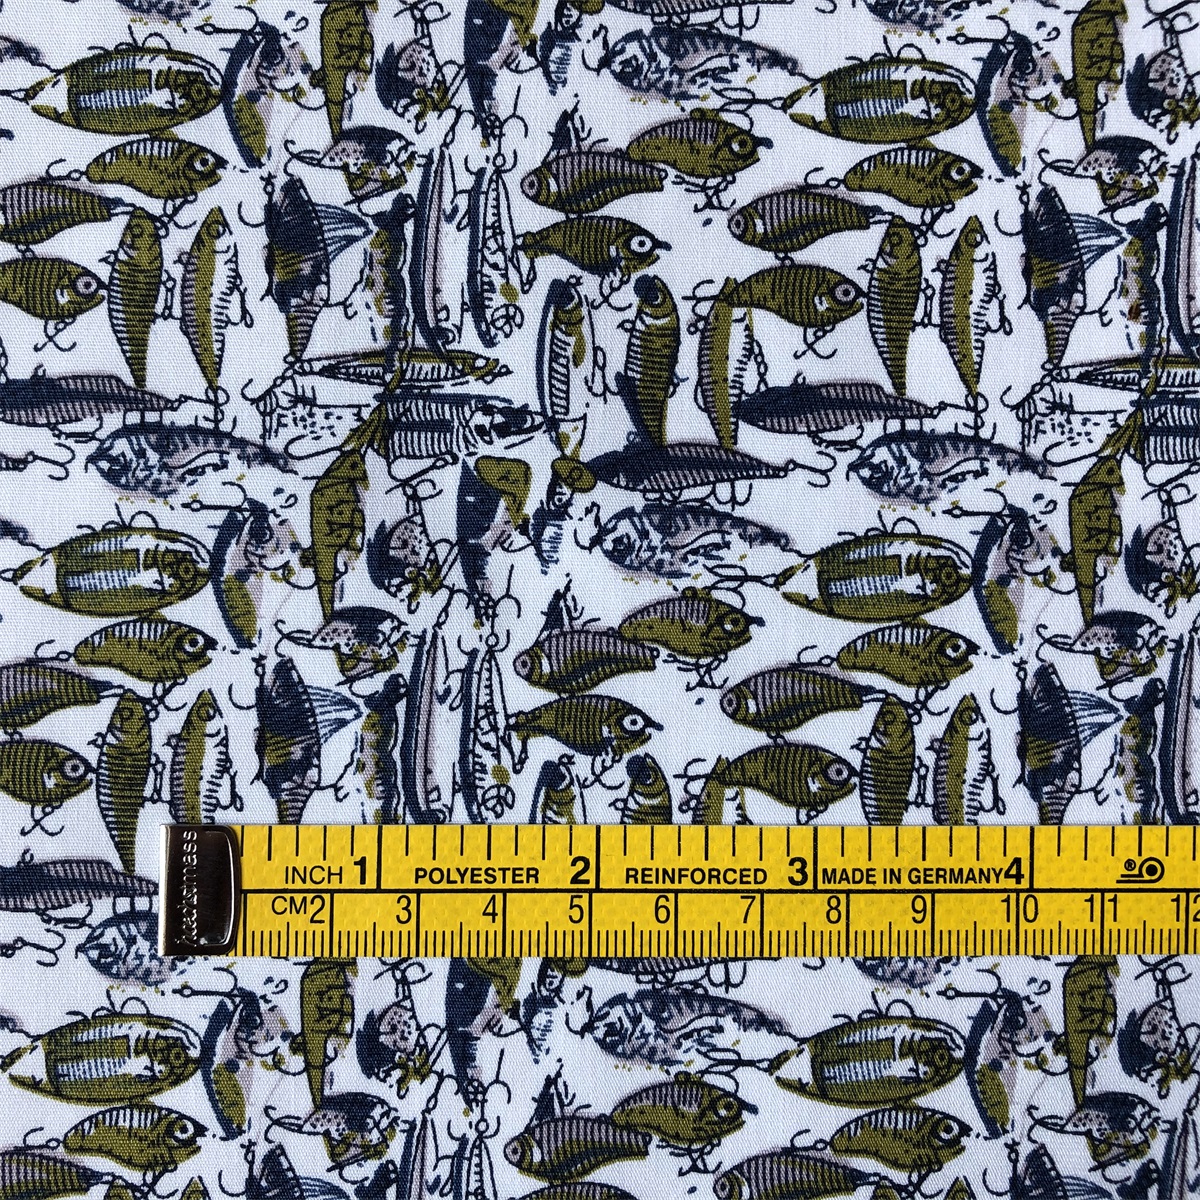 Sun-rising Textile Cotton fabric new fashionable pattern 100% cotton poplin printed fabric for men's casual shirts